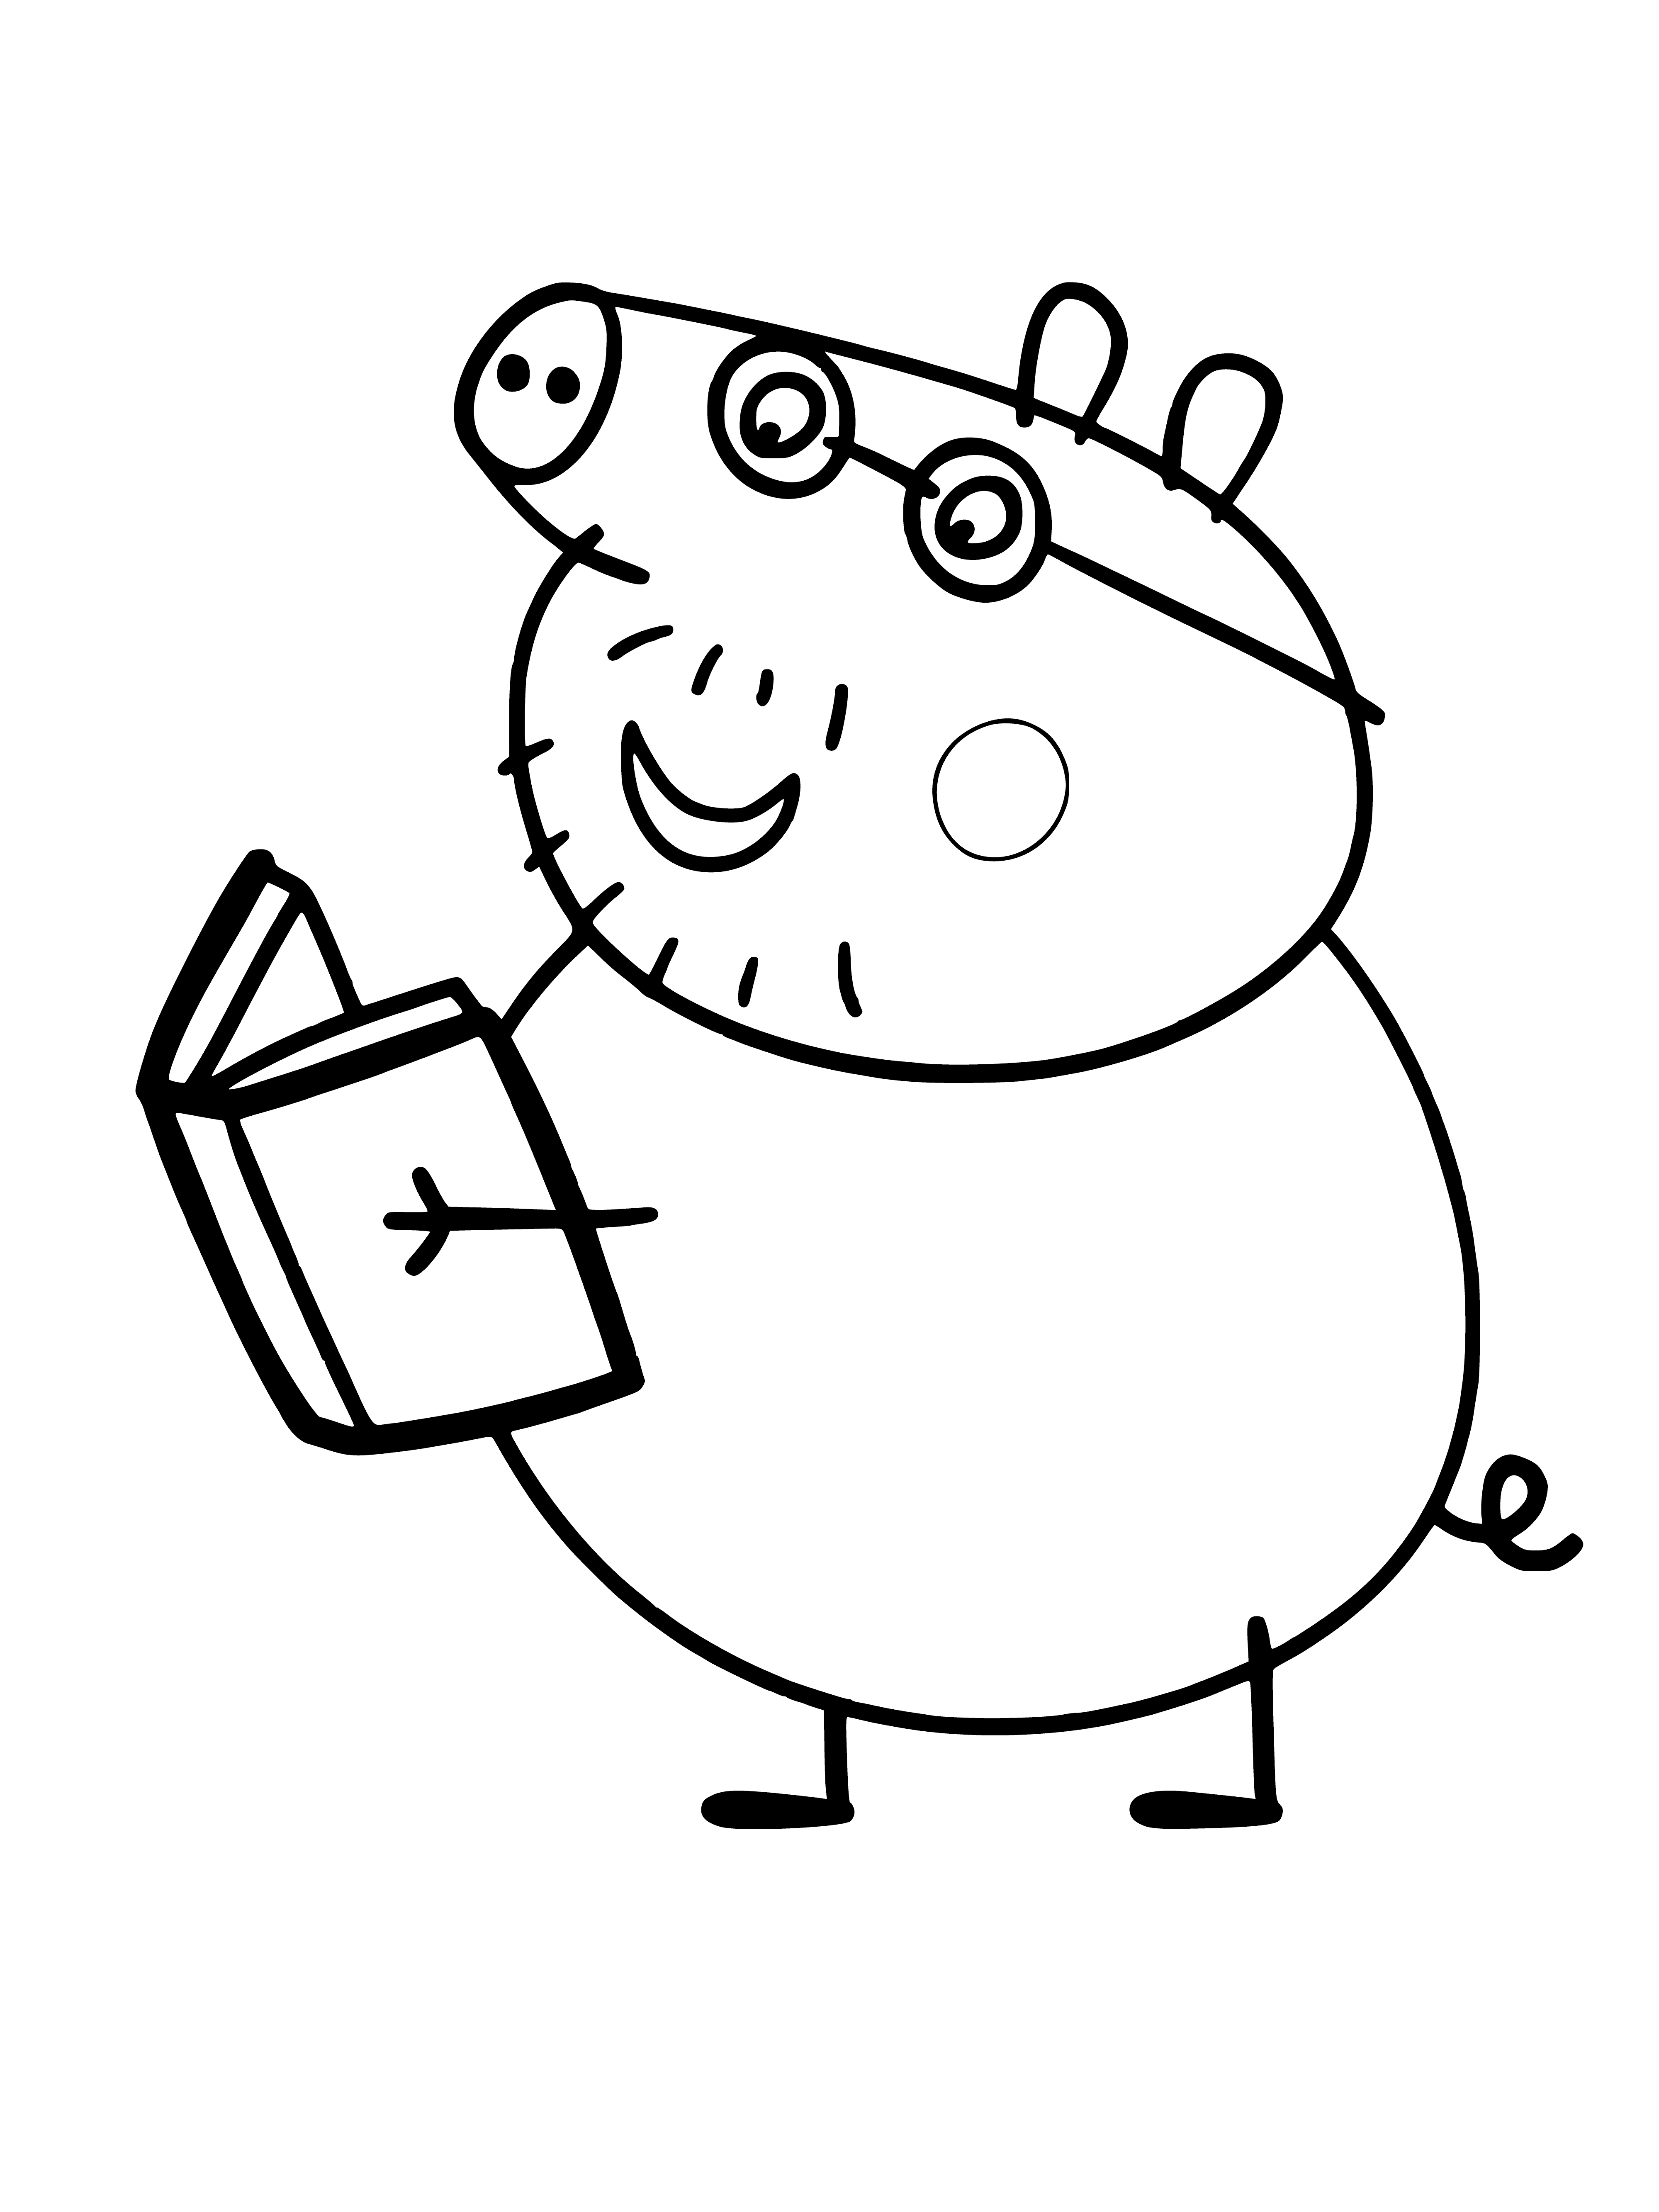 coloring page: Daddy Pig reads a book to Peppa & she looks at coloring pages; perfect family moment! #familytime #love